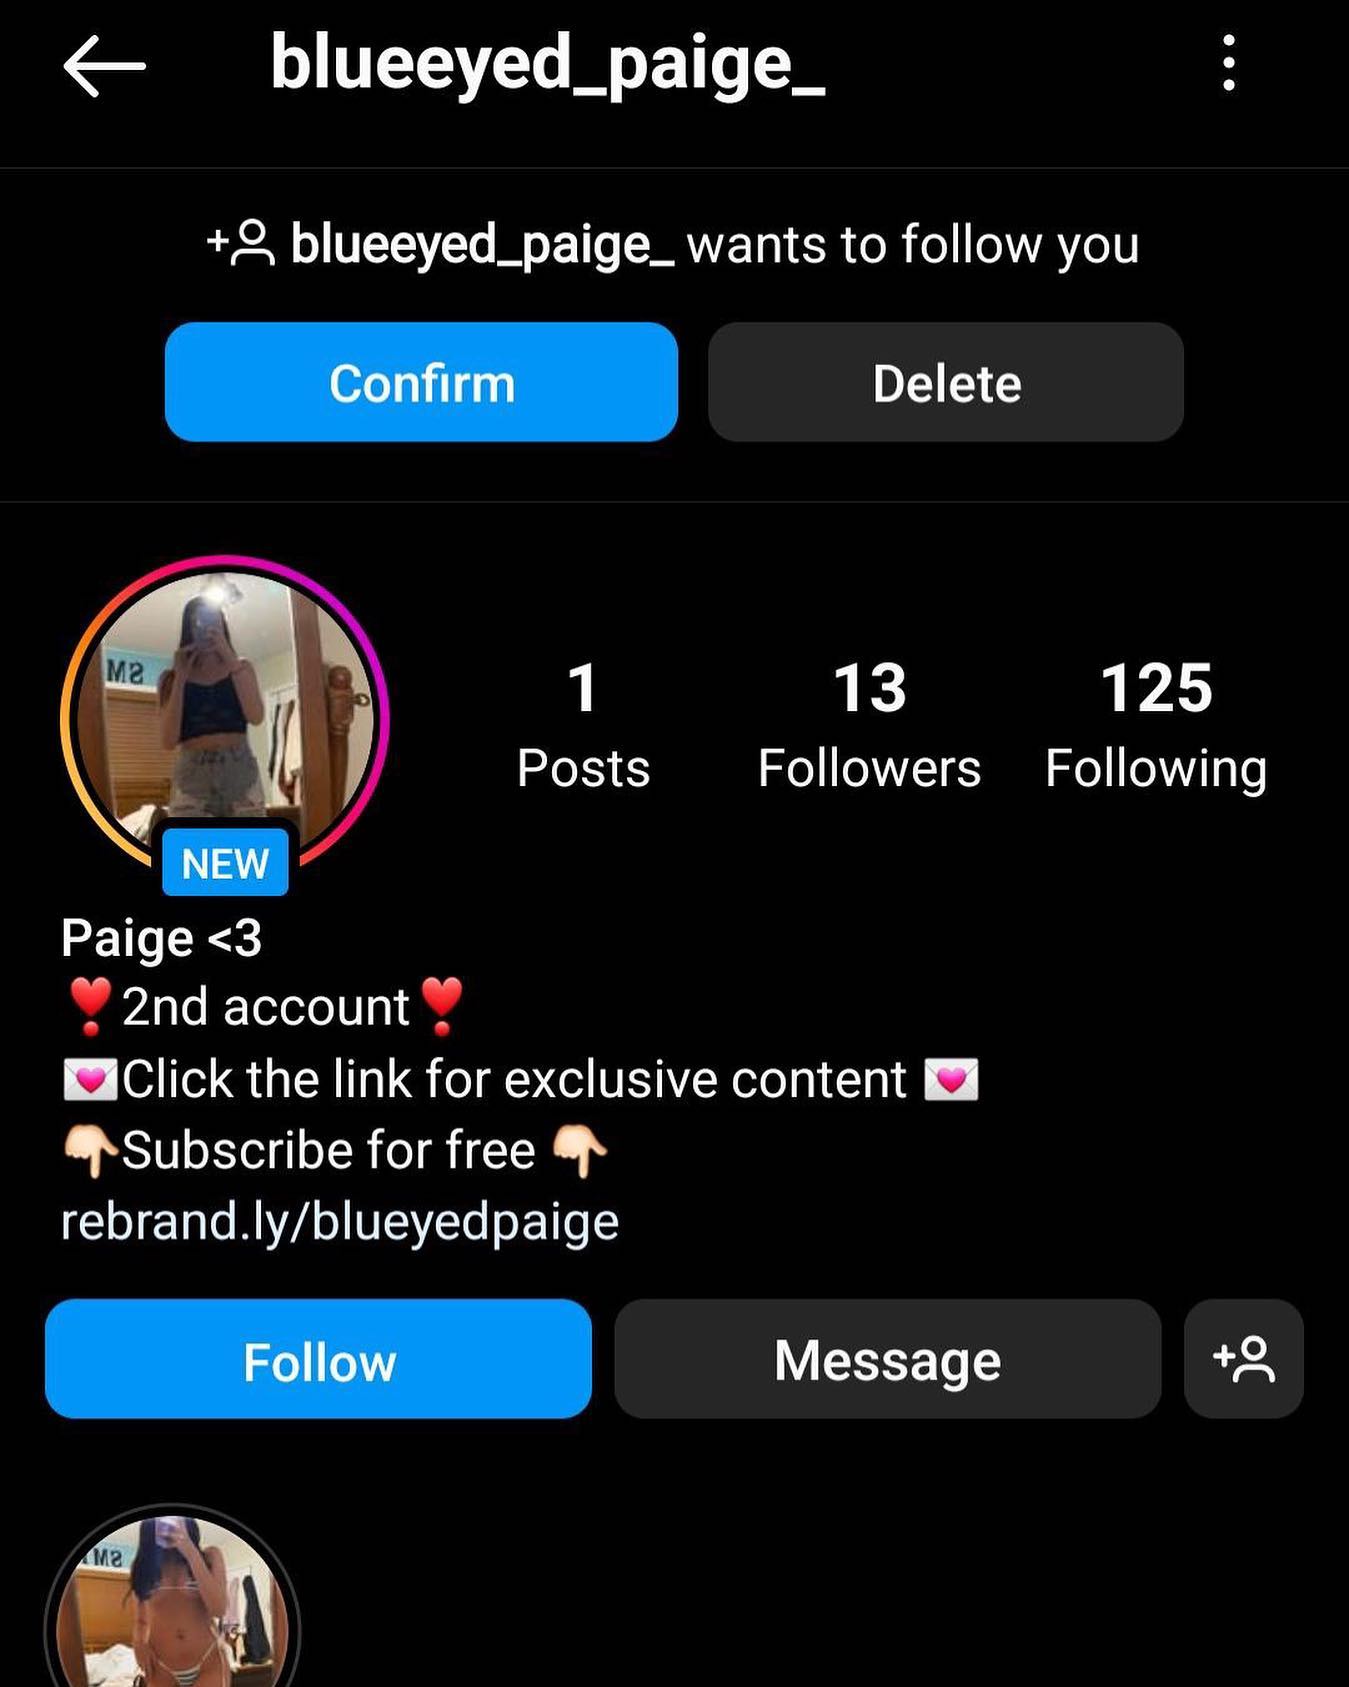 Hi guys, this is not me! Please report the account… Thank you ❤️❤️